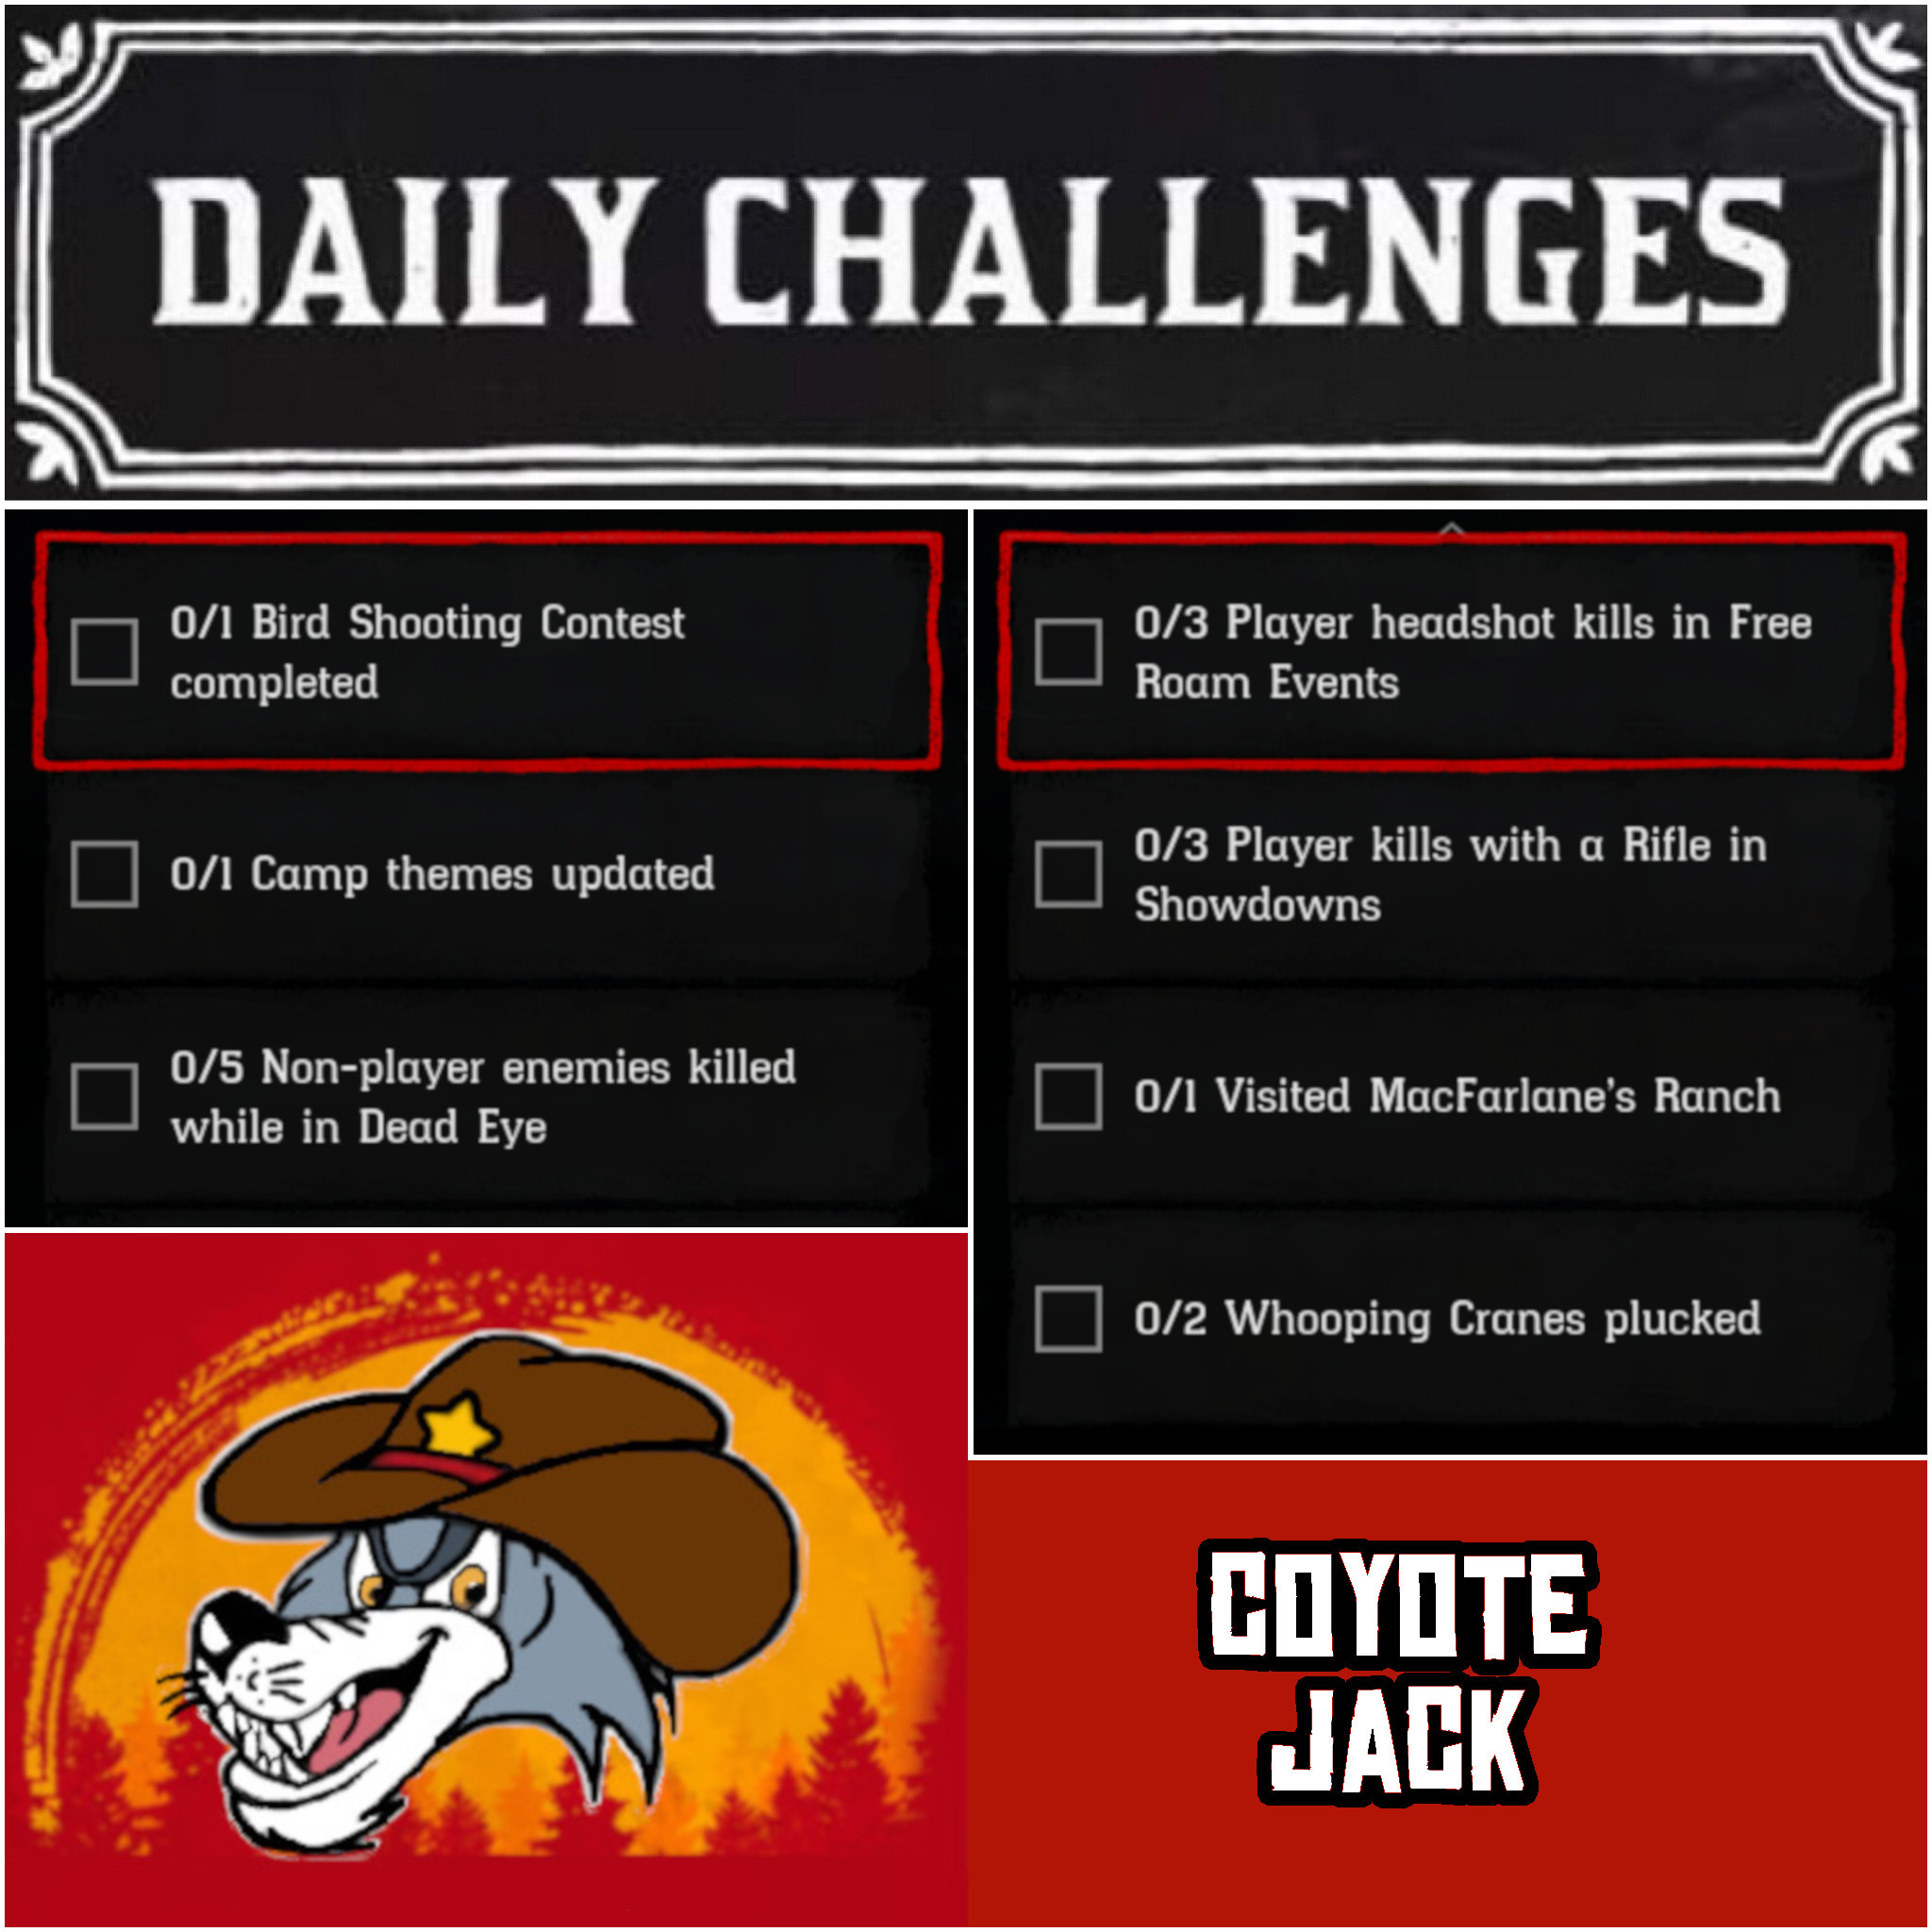 You are currently viewing Thursday 05 November Daily Challenges